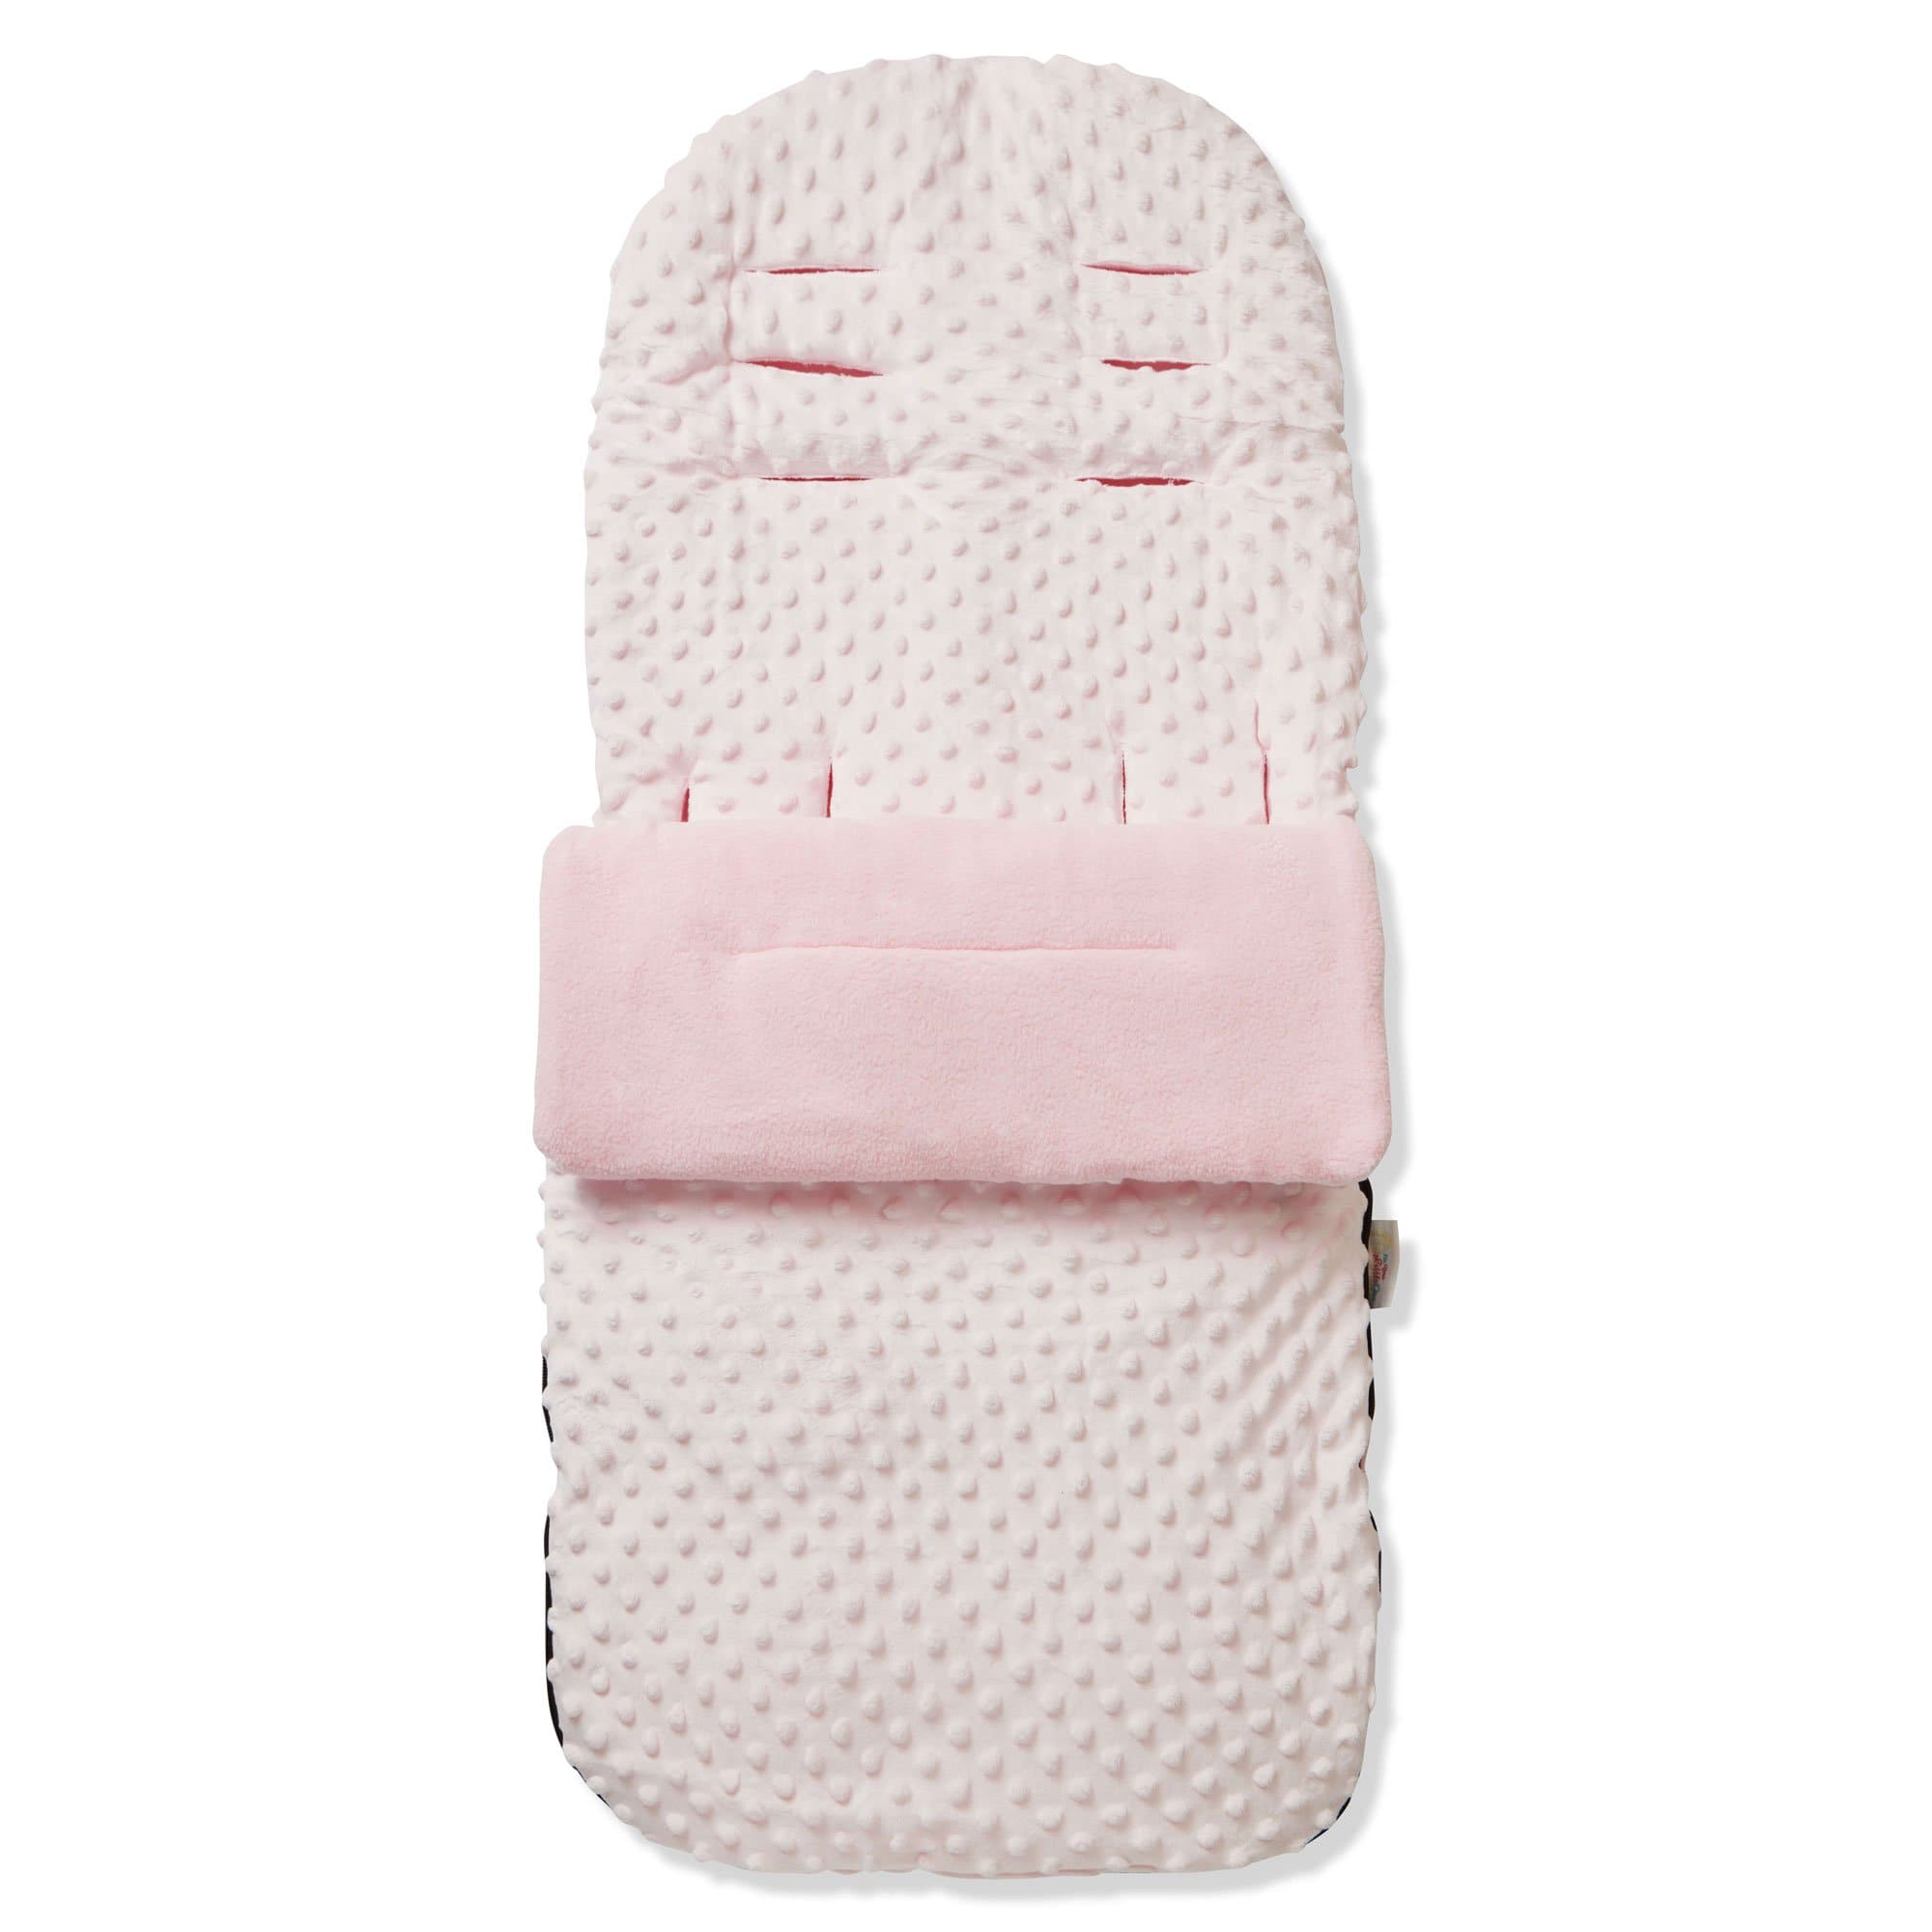 Dimple Footmuff / Cosy Toes Compatible with Firstwheels - For Your Little One